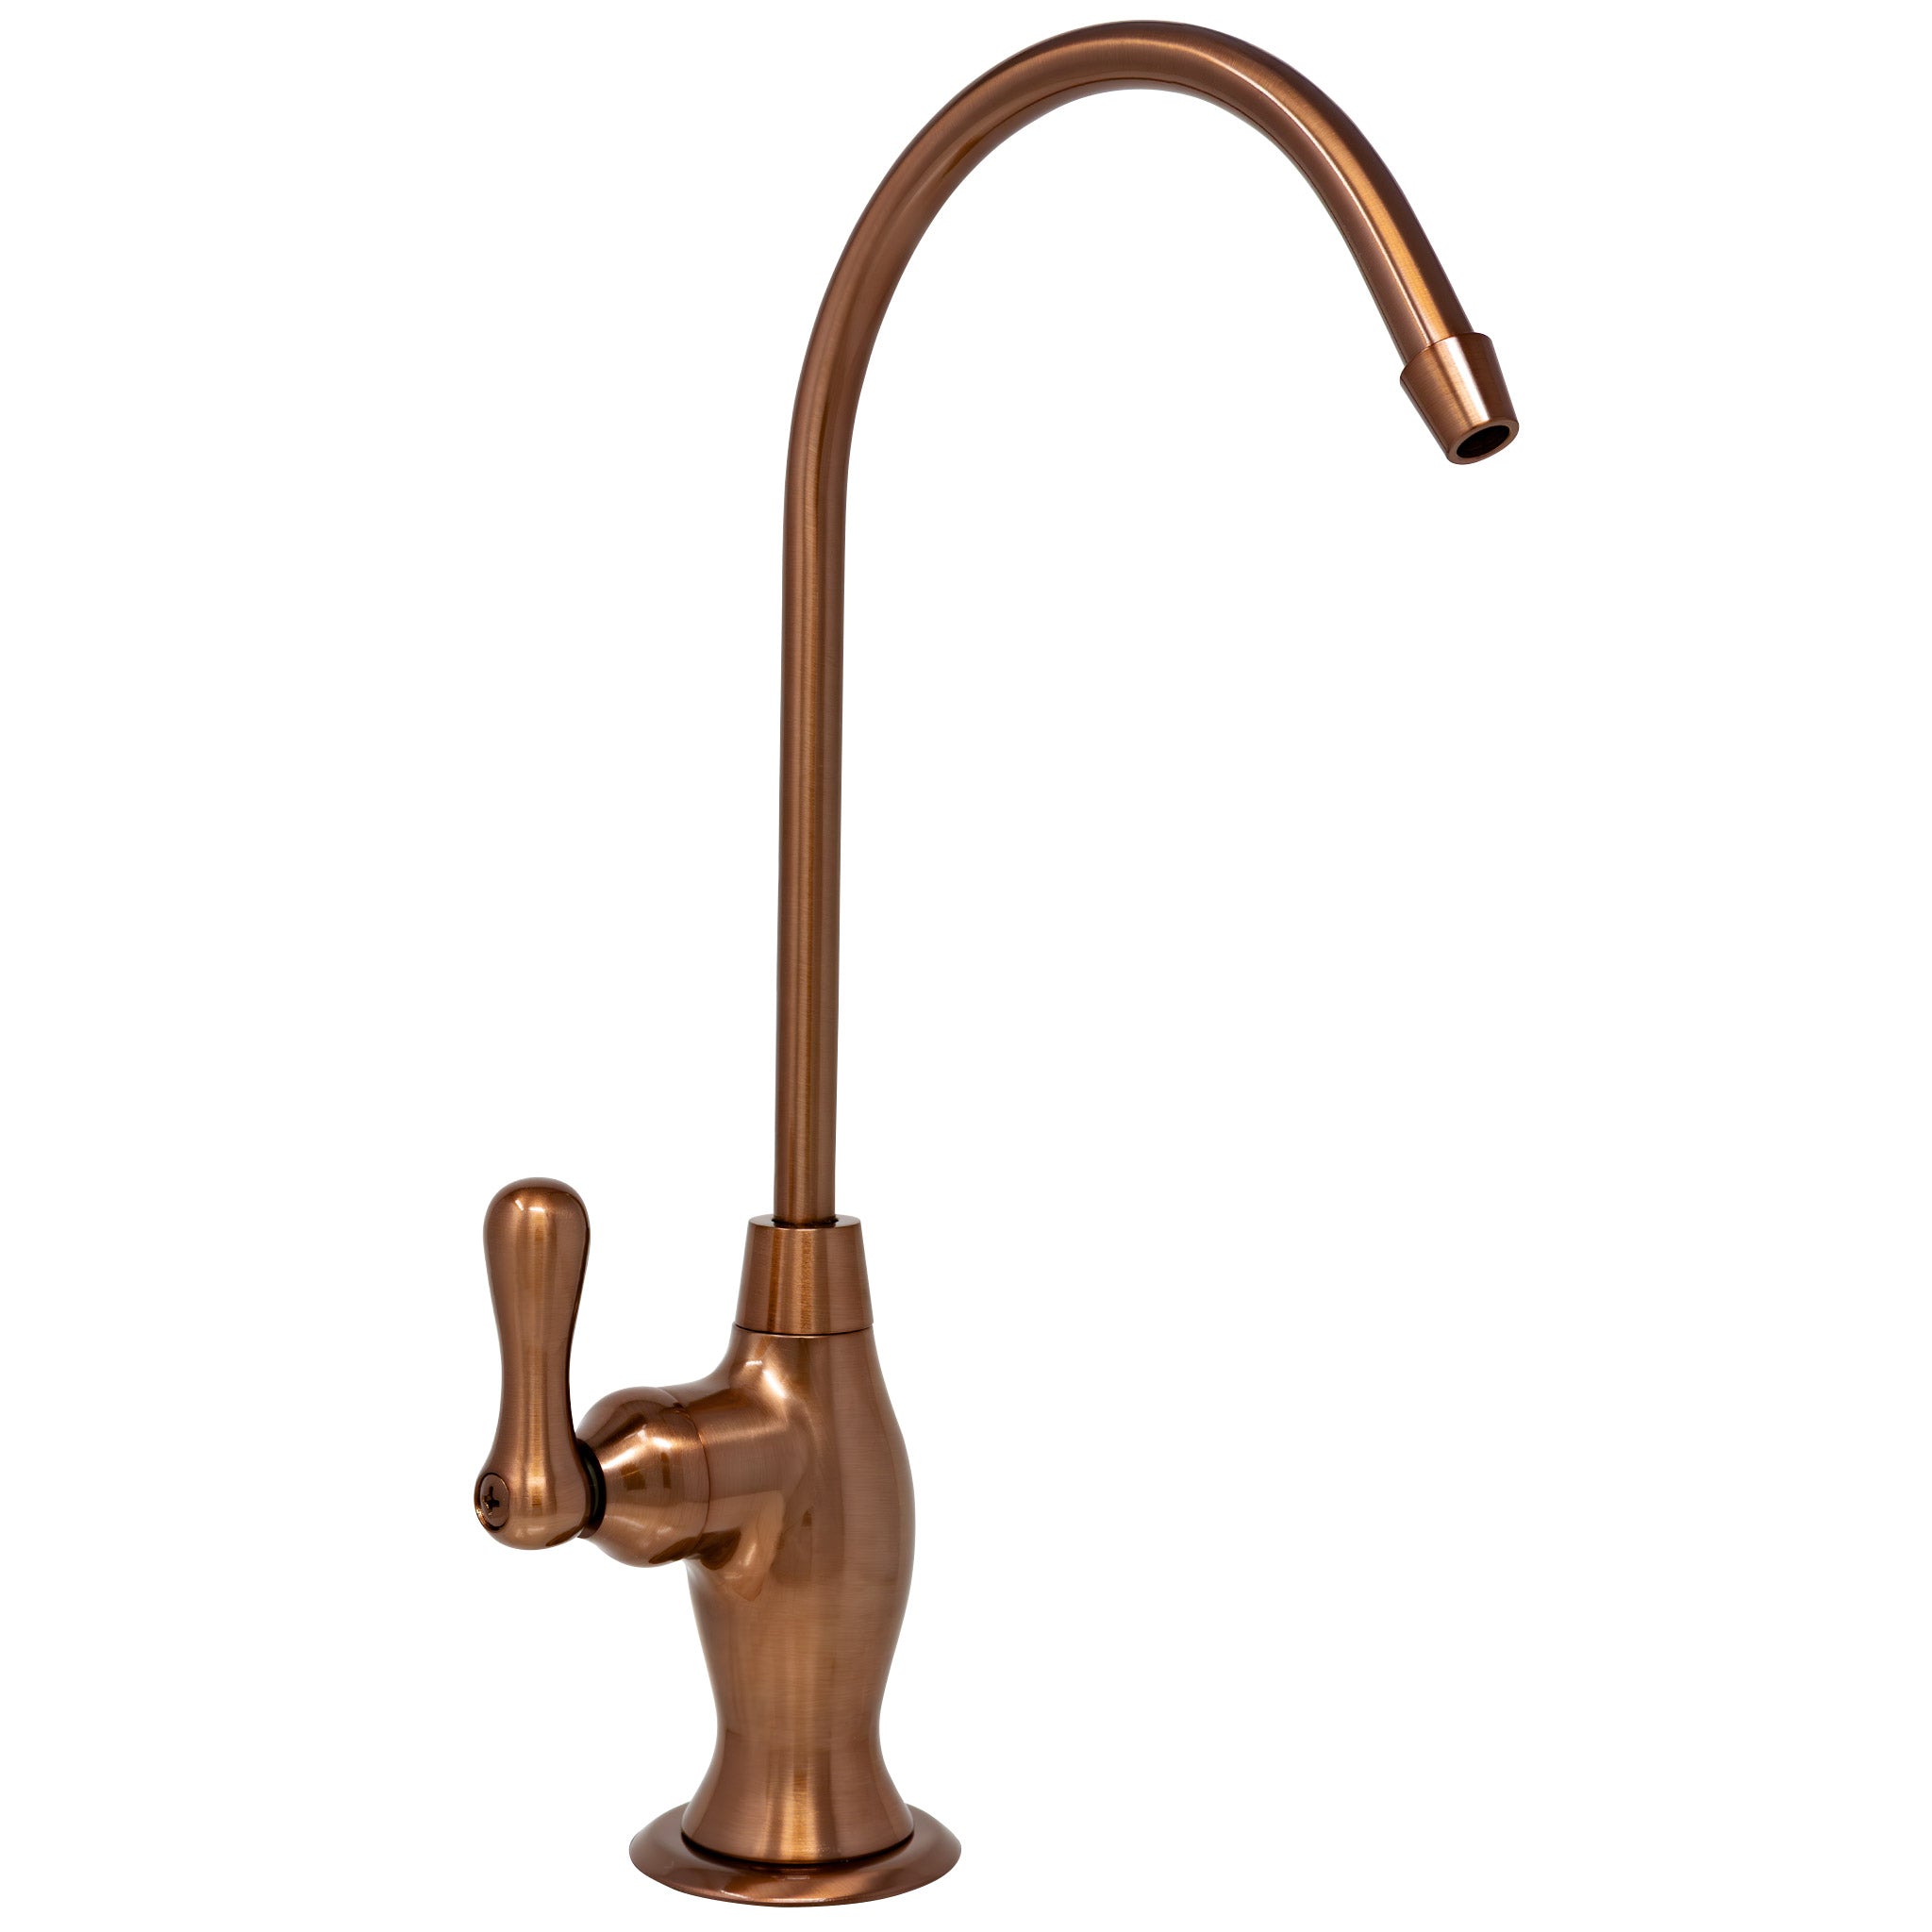 Water Filtration Faucet Vase Style Rose Gold Reverse Osmosis Non Air Gap. Certified by NSF.